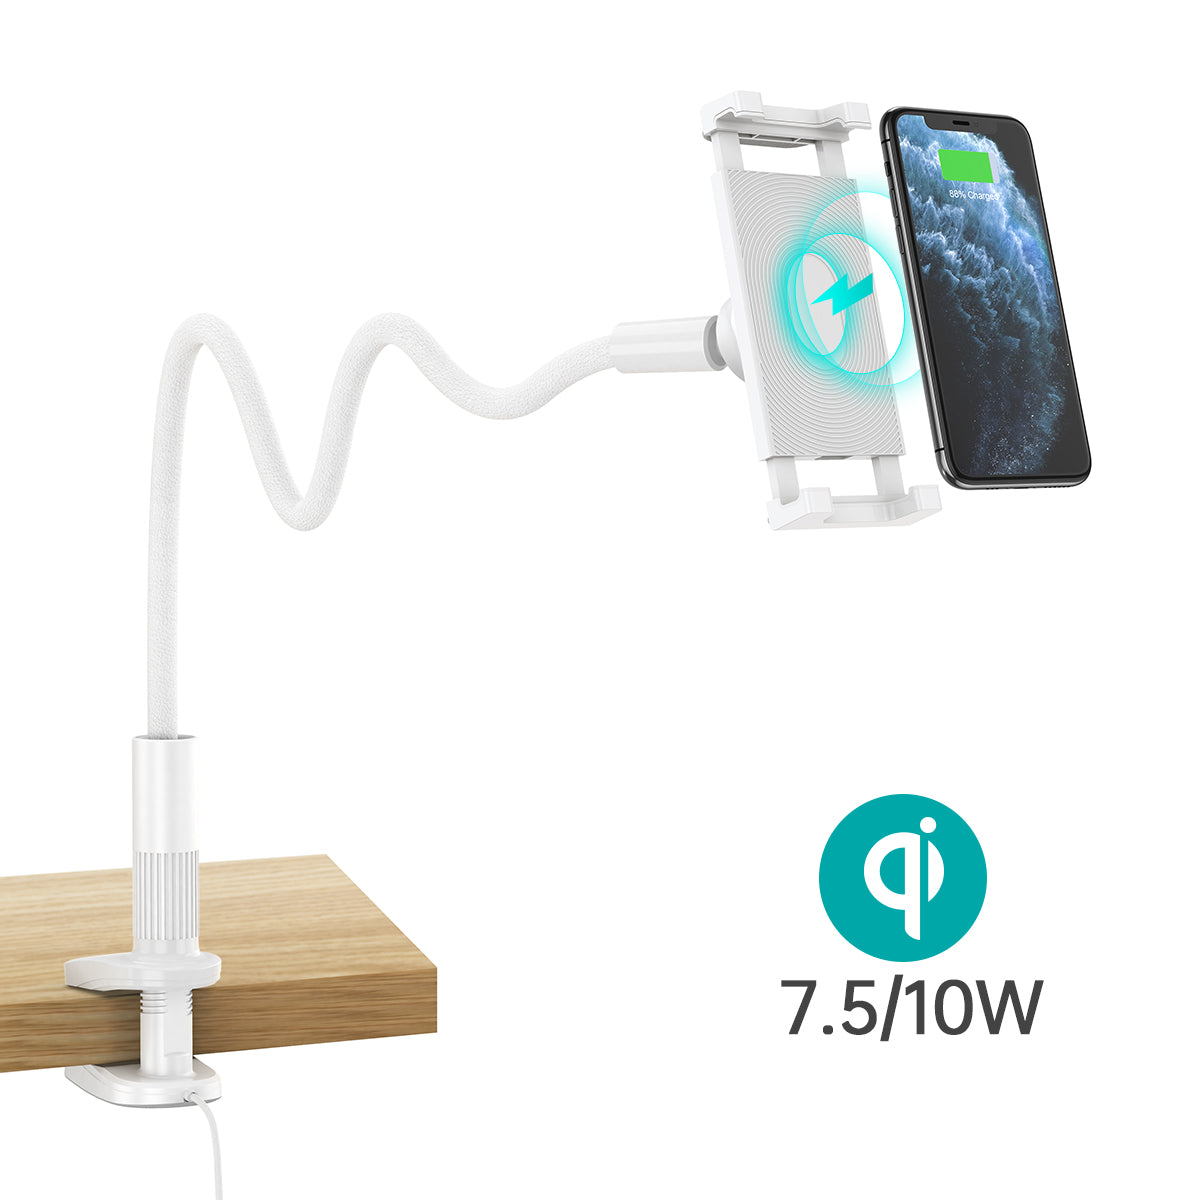 T548-S Choetech 2-in-1 Phone Mount & Fast Wireless Charger